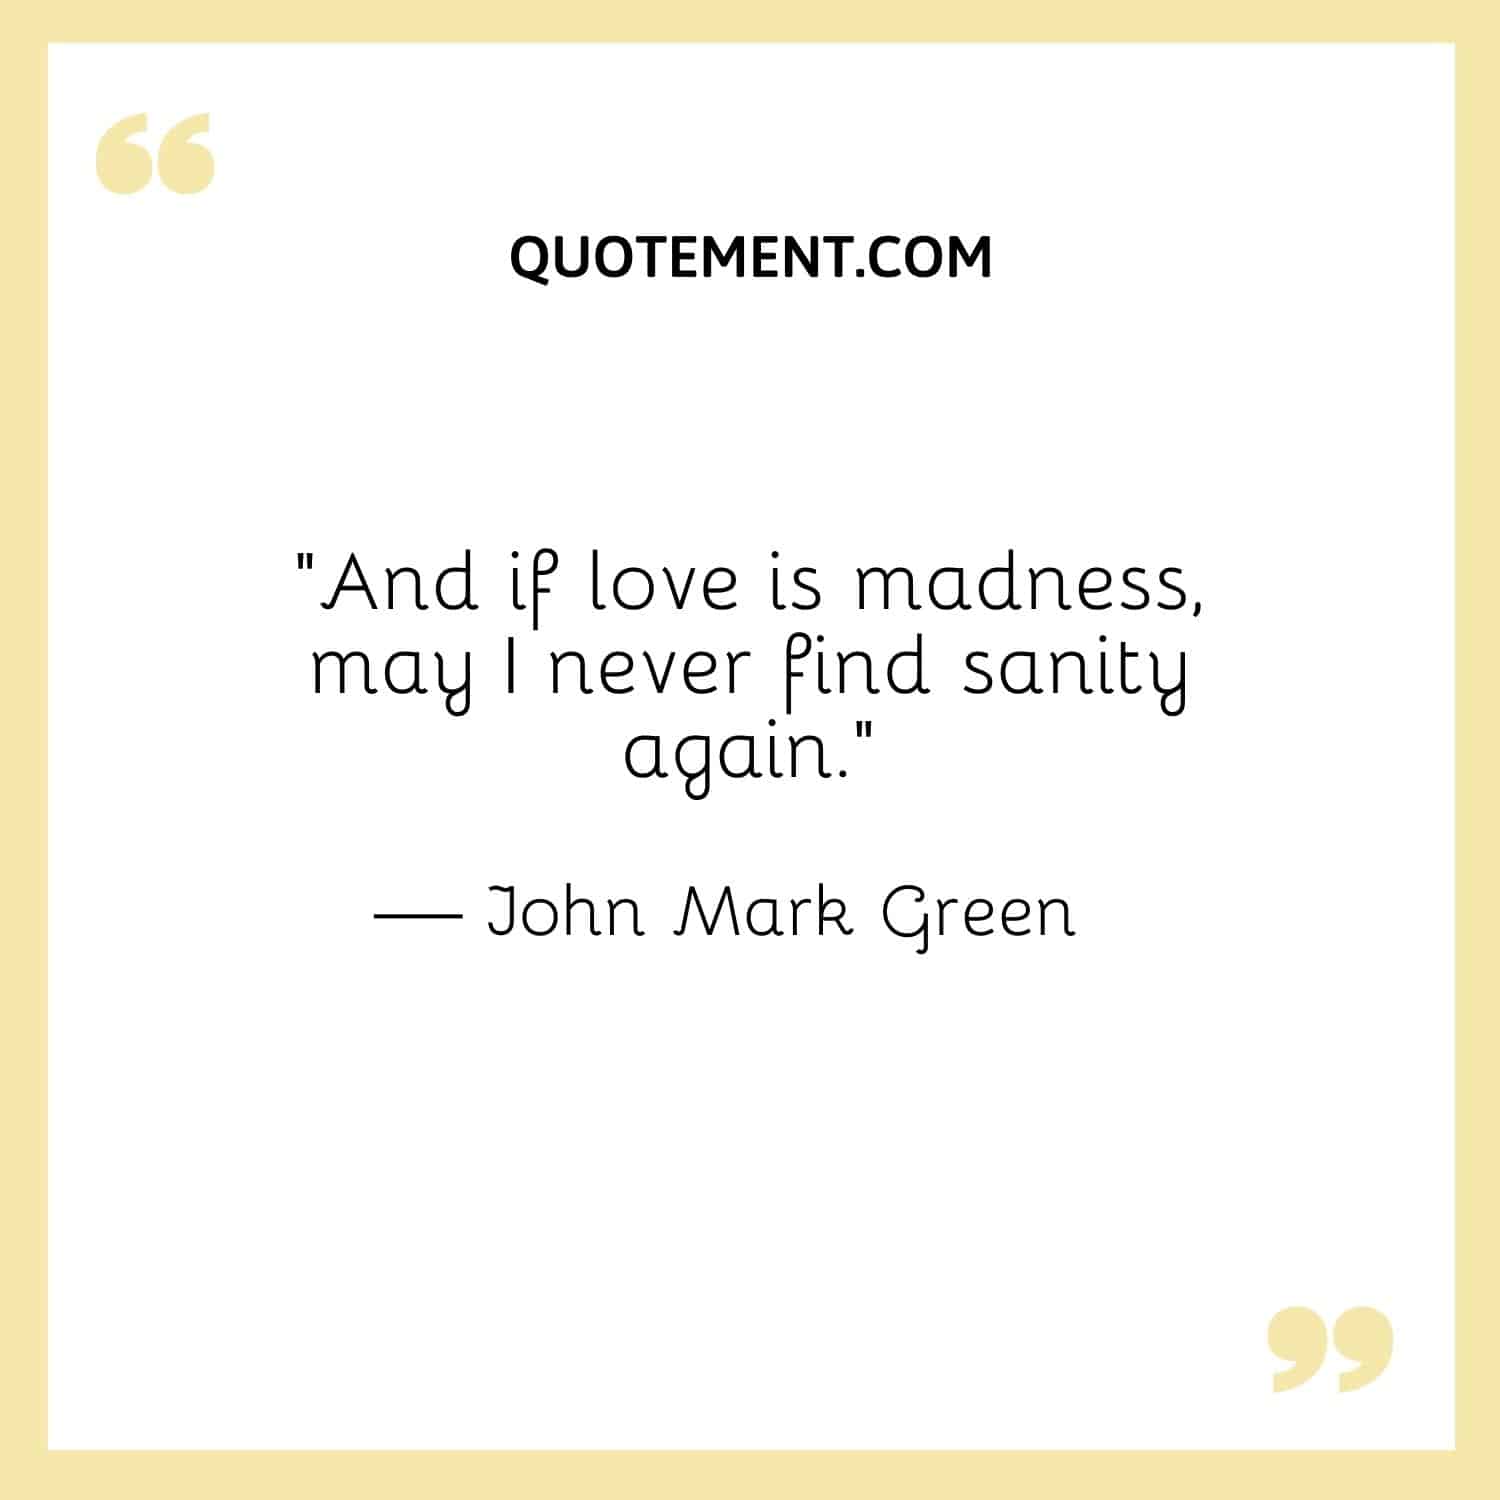 And if love is madness, may I never find sanity again